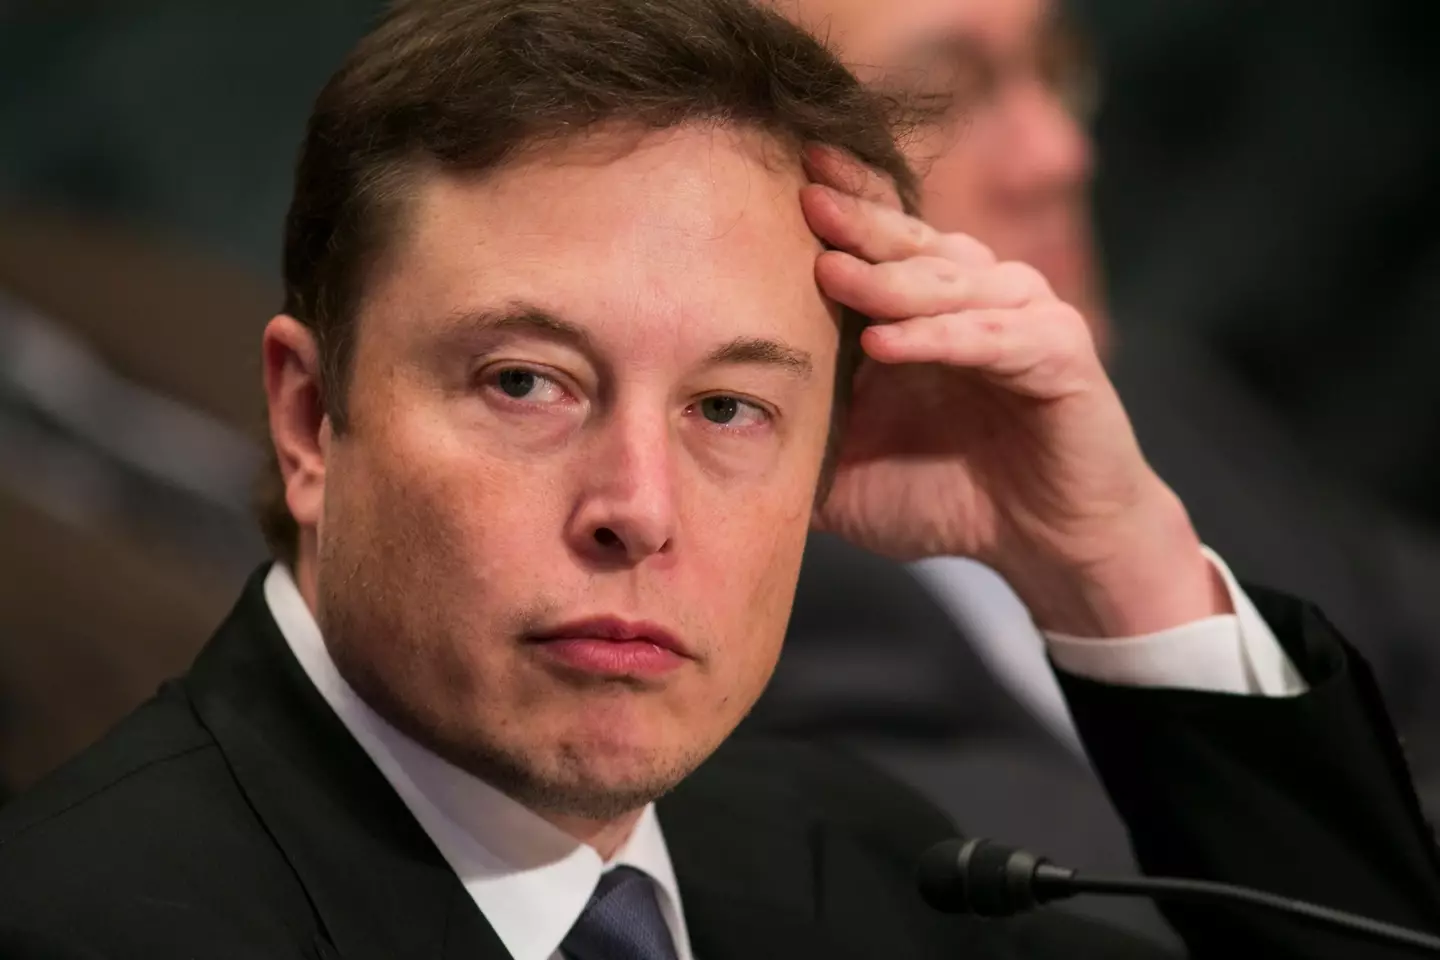 Elon Musk has been accused of propositioning a flight attendant for sex.